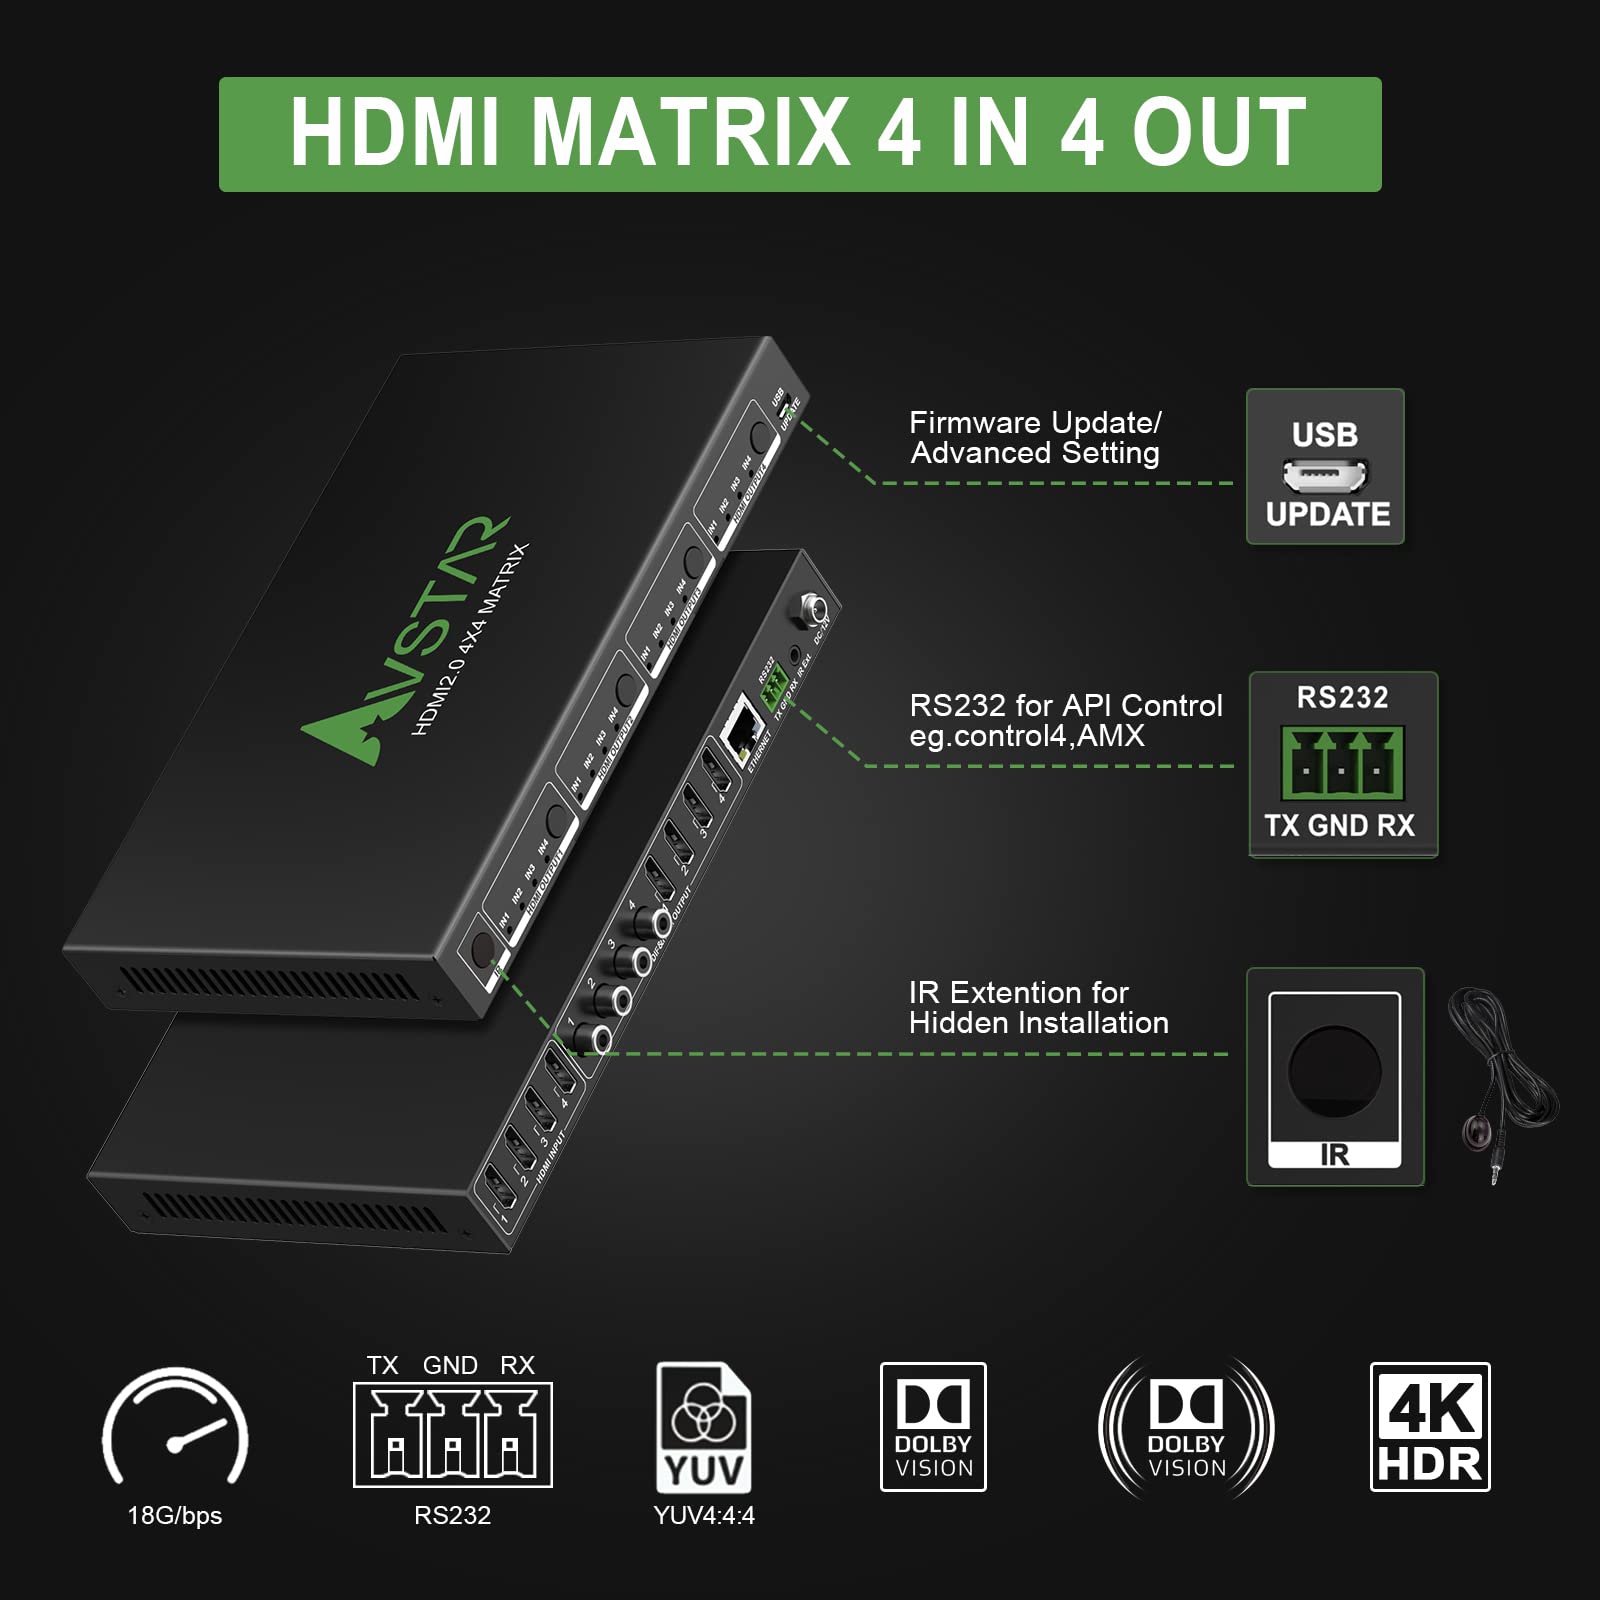 4K 60Hz HDMI Matrix Switch 4x4,HDMI 2.0 Matrix Switcher Splitter 4 in 4 Out with coaxial SPDIF Audio 5.1CH, 4K@60Hz 4:4:4 8bit HDR HDCP 2.2,Down Scaler to 1080P,Button,IR Remote,RS232,IP Control